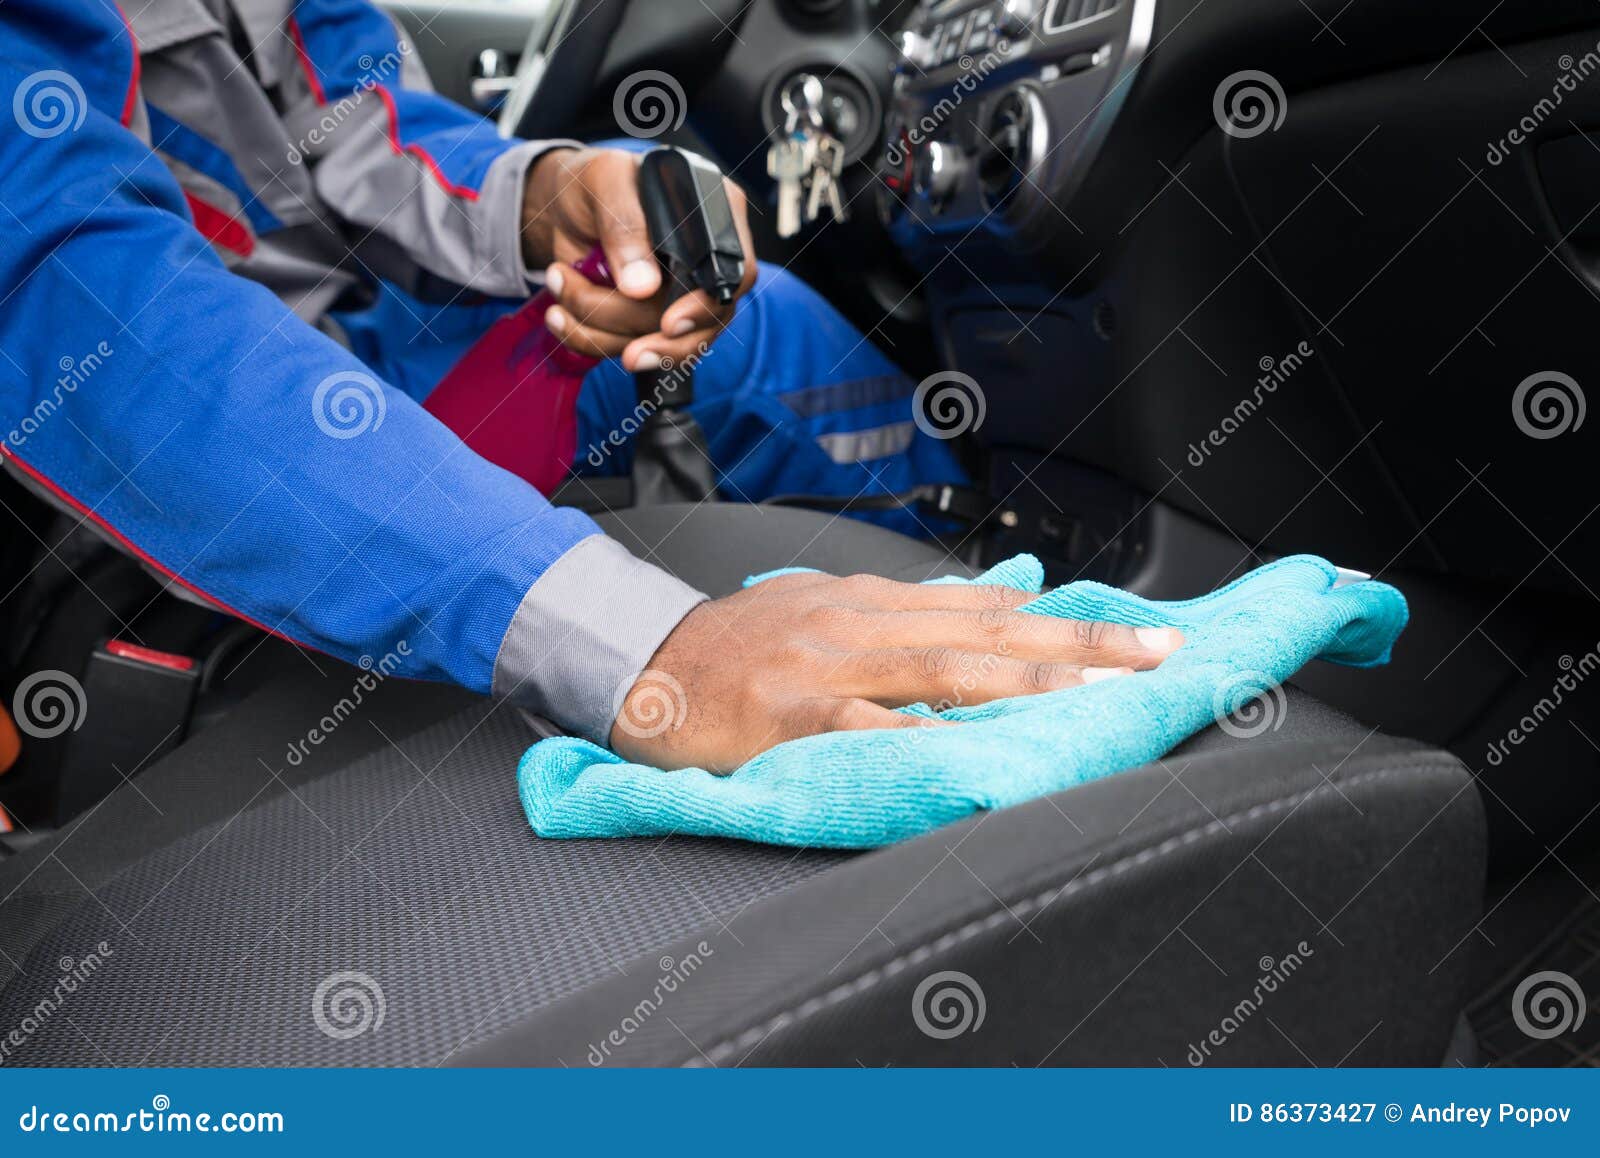 worker cleaning seat inside the car